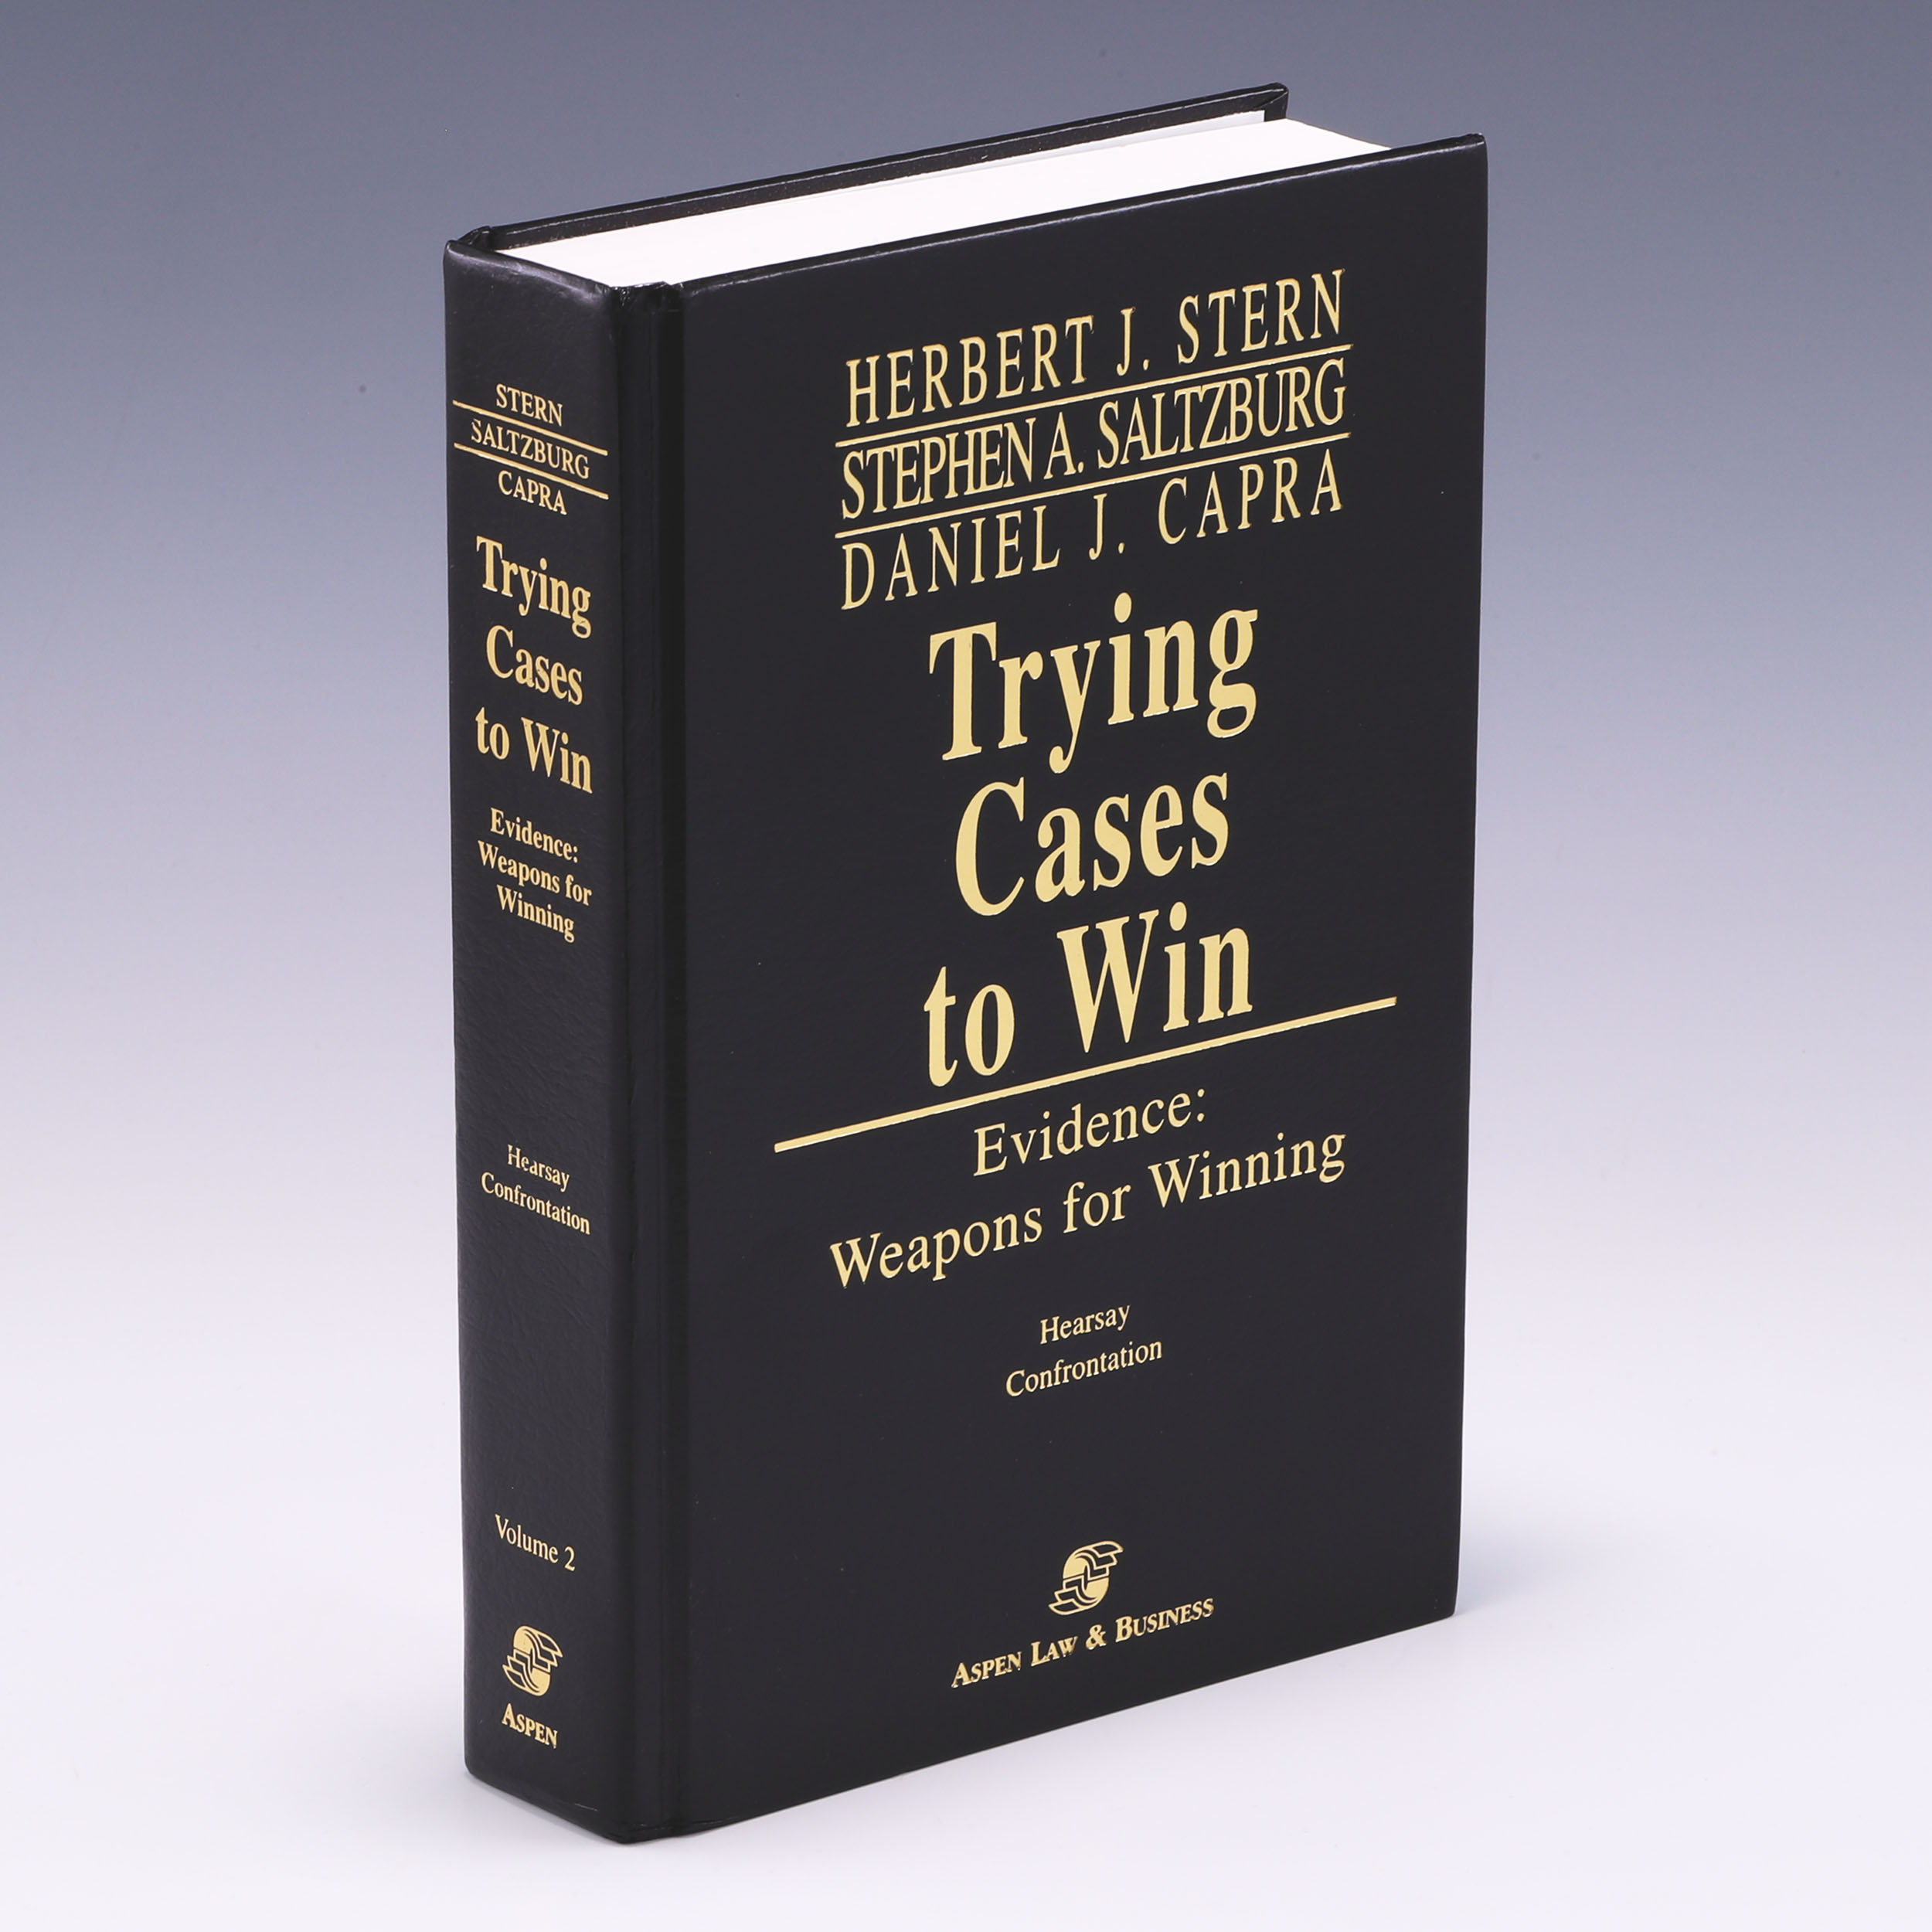 Trying Cases to Win: Evidence Weapons for Winning, Volume I: Relevance, Authentication, Motions in Limine, Voir Dire, Depositions - Herbert Jay Stern, et al.